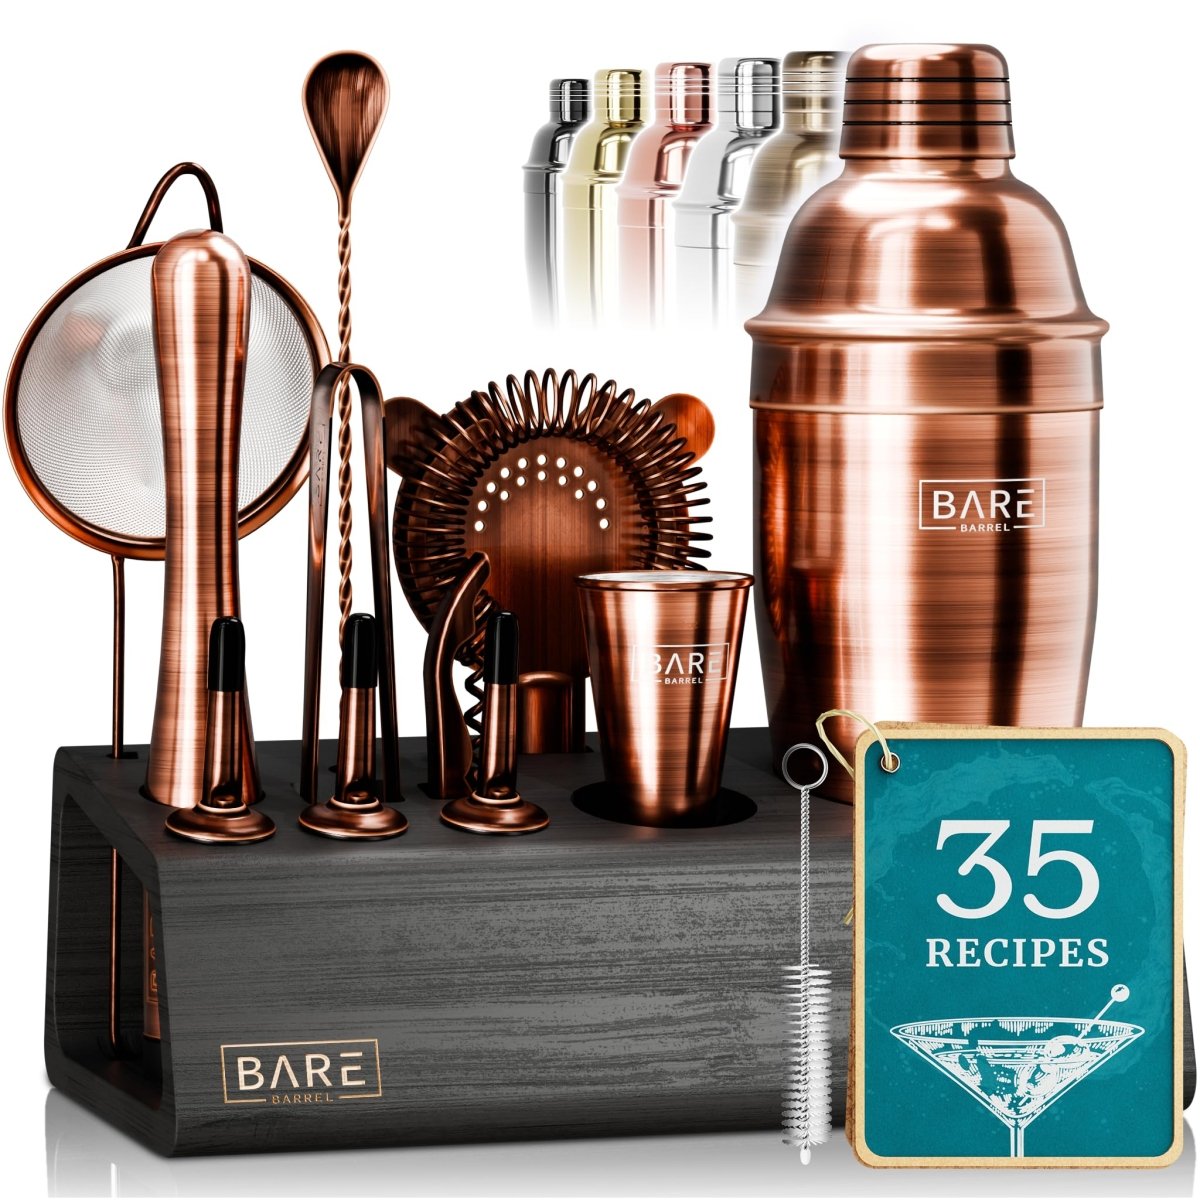 BARE BARREL® 14-Piece Professional Cocktail Making Set - 7 colors | Includes 28oz Boston Shaker & Home Bar Mixing Tools with 35 Recipe Cards | Ideal Bartending Kit Gift Set - Easiley - B0CH844X9W